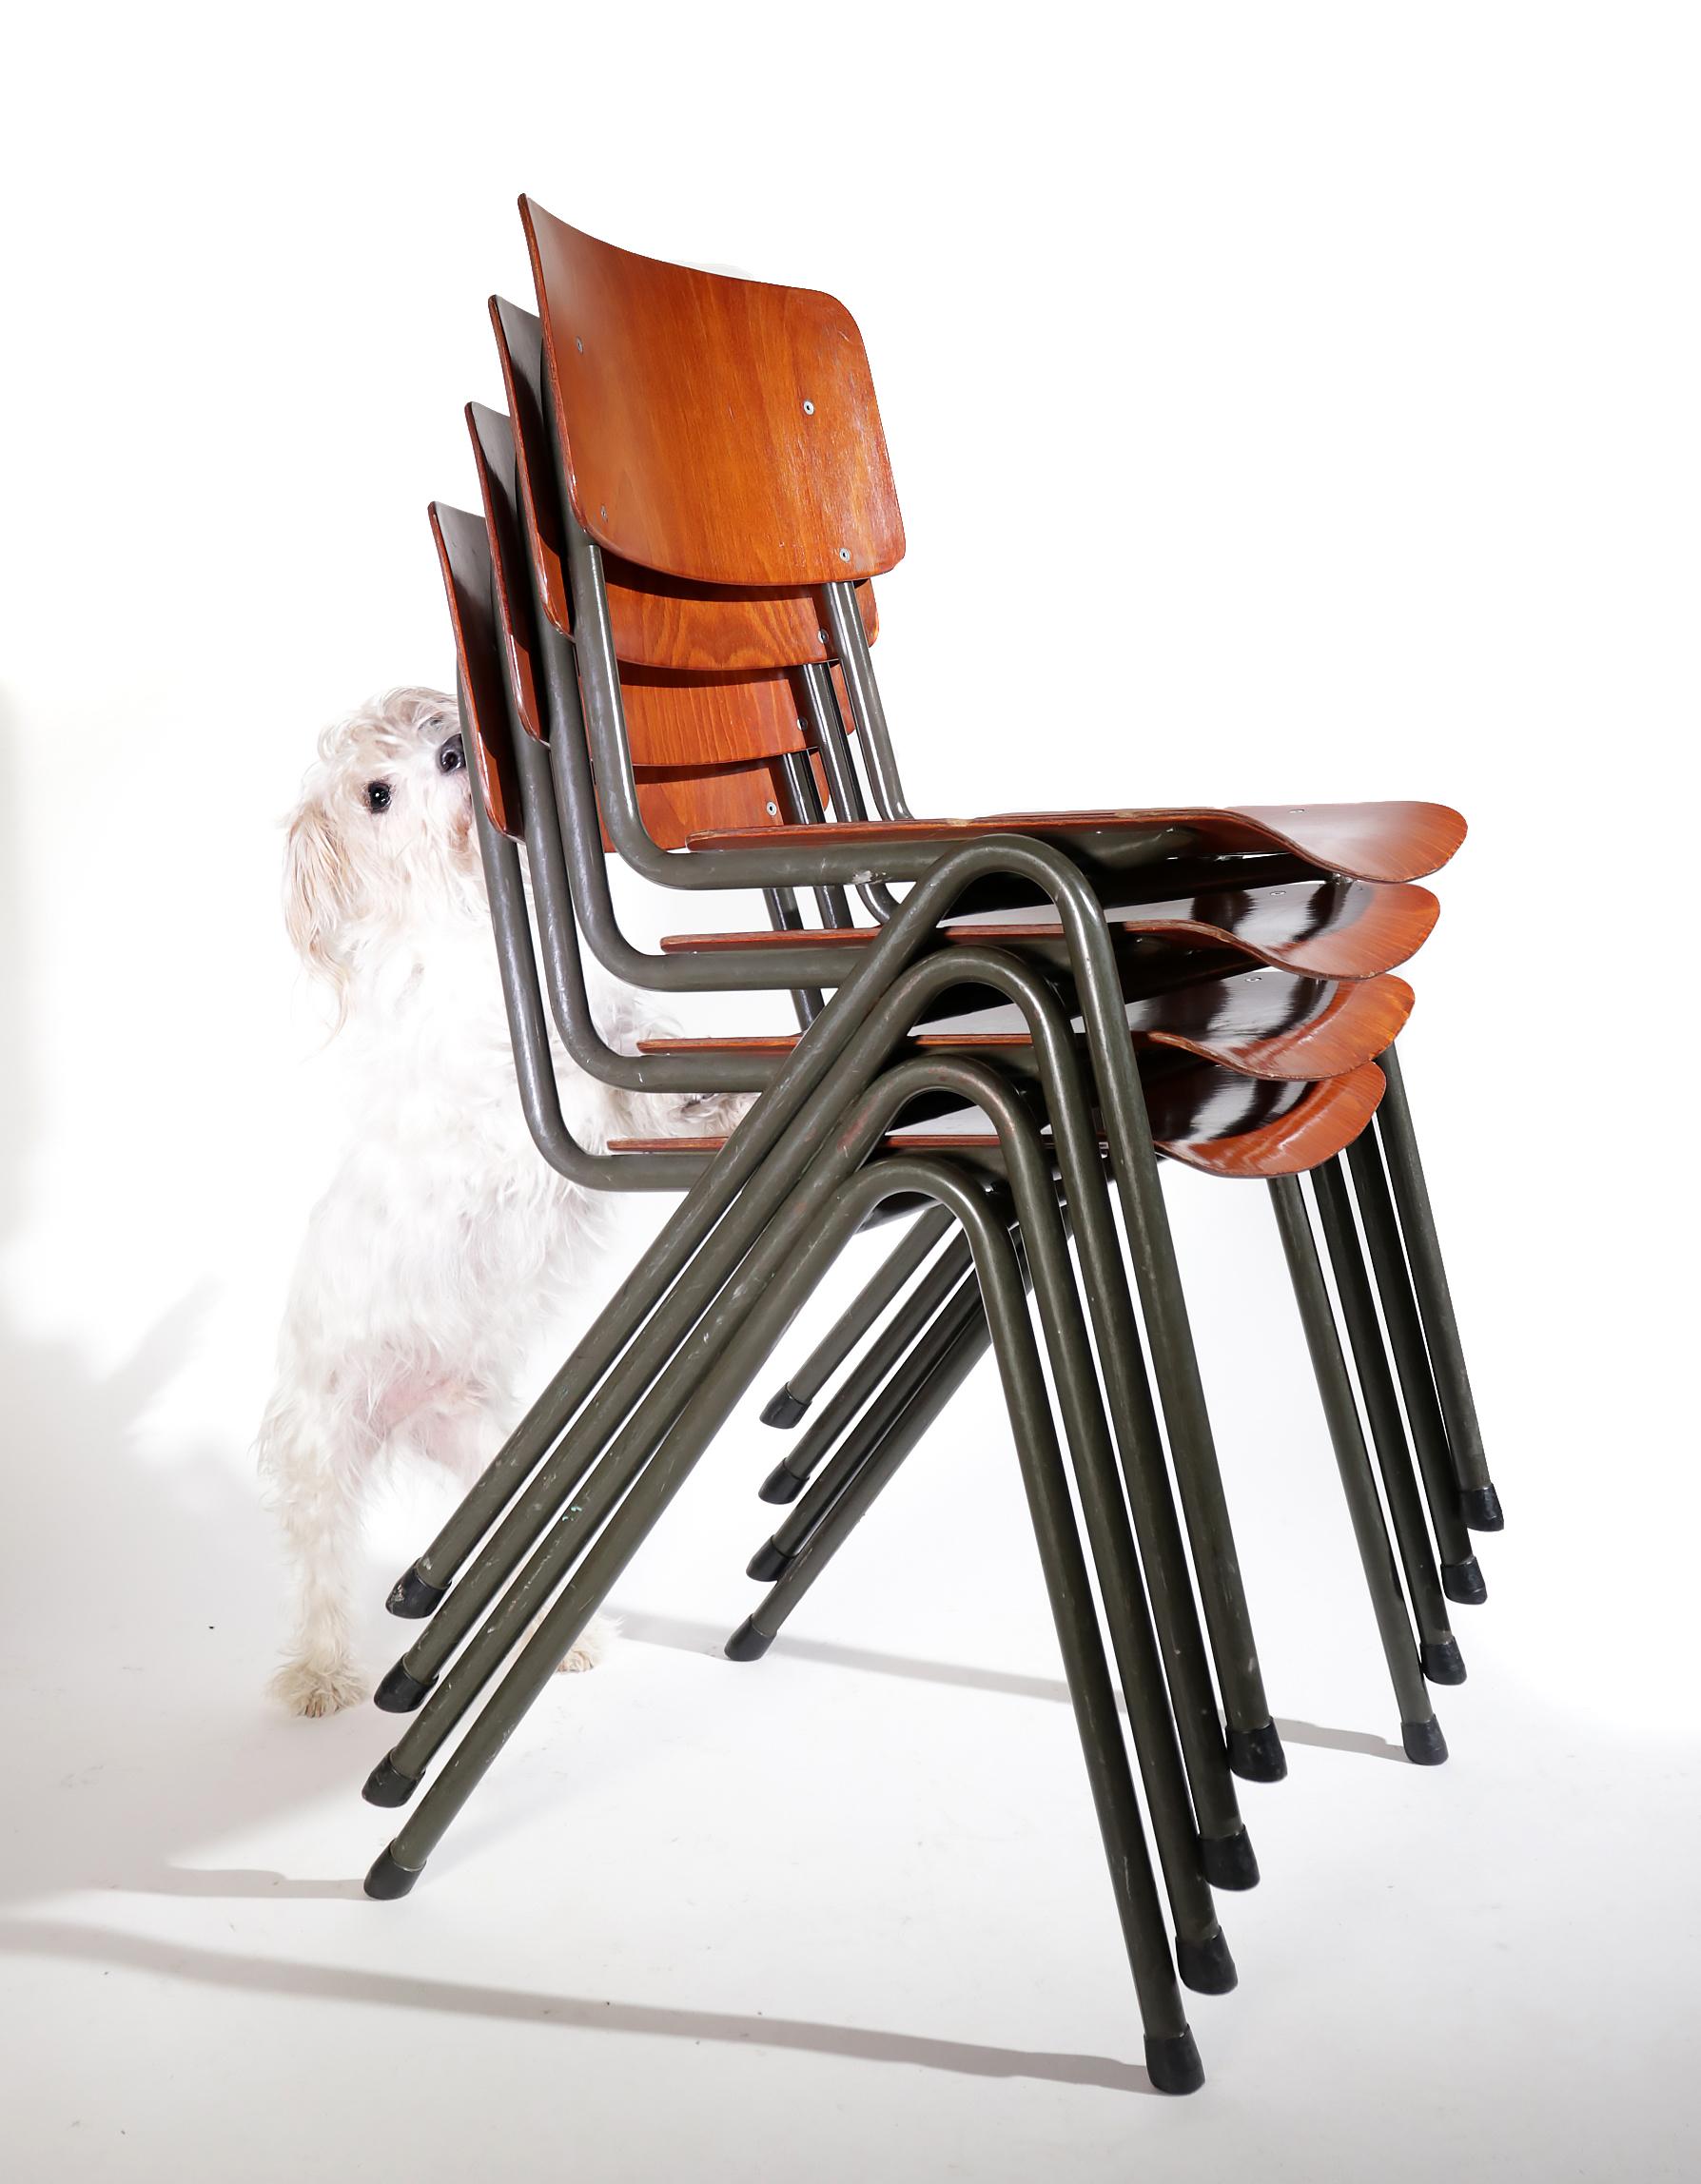 Industrial Design Eromes Pagholz Stacking Dining Chairs V-Shape Legs 8